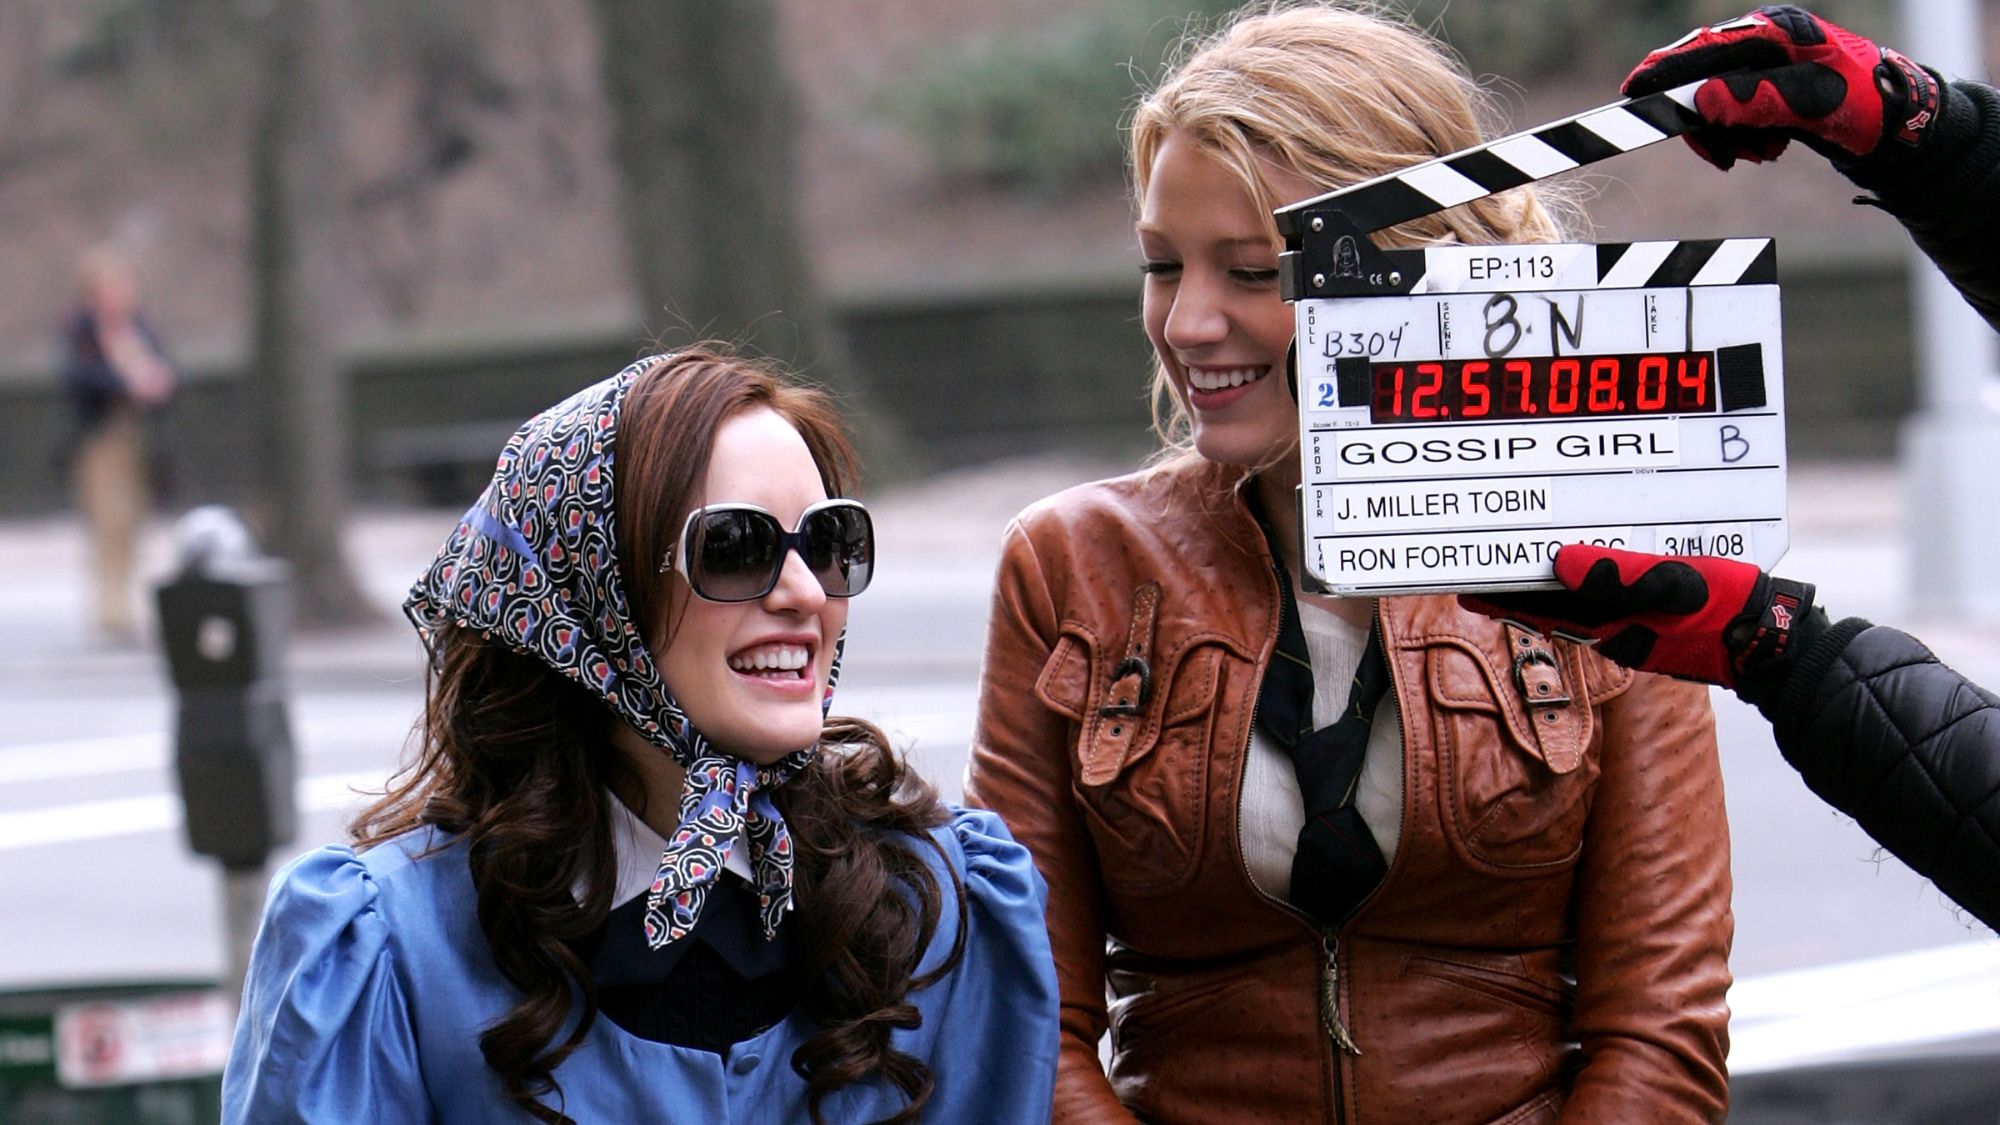 The Gossip Girl reboot's release date, cast, and plot – what we